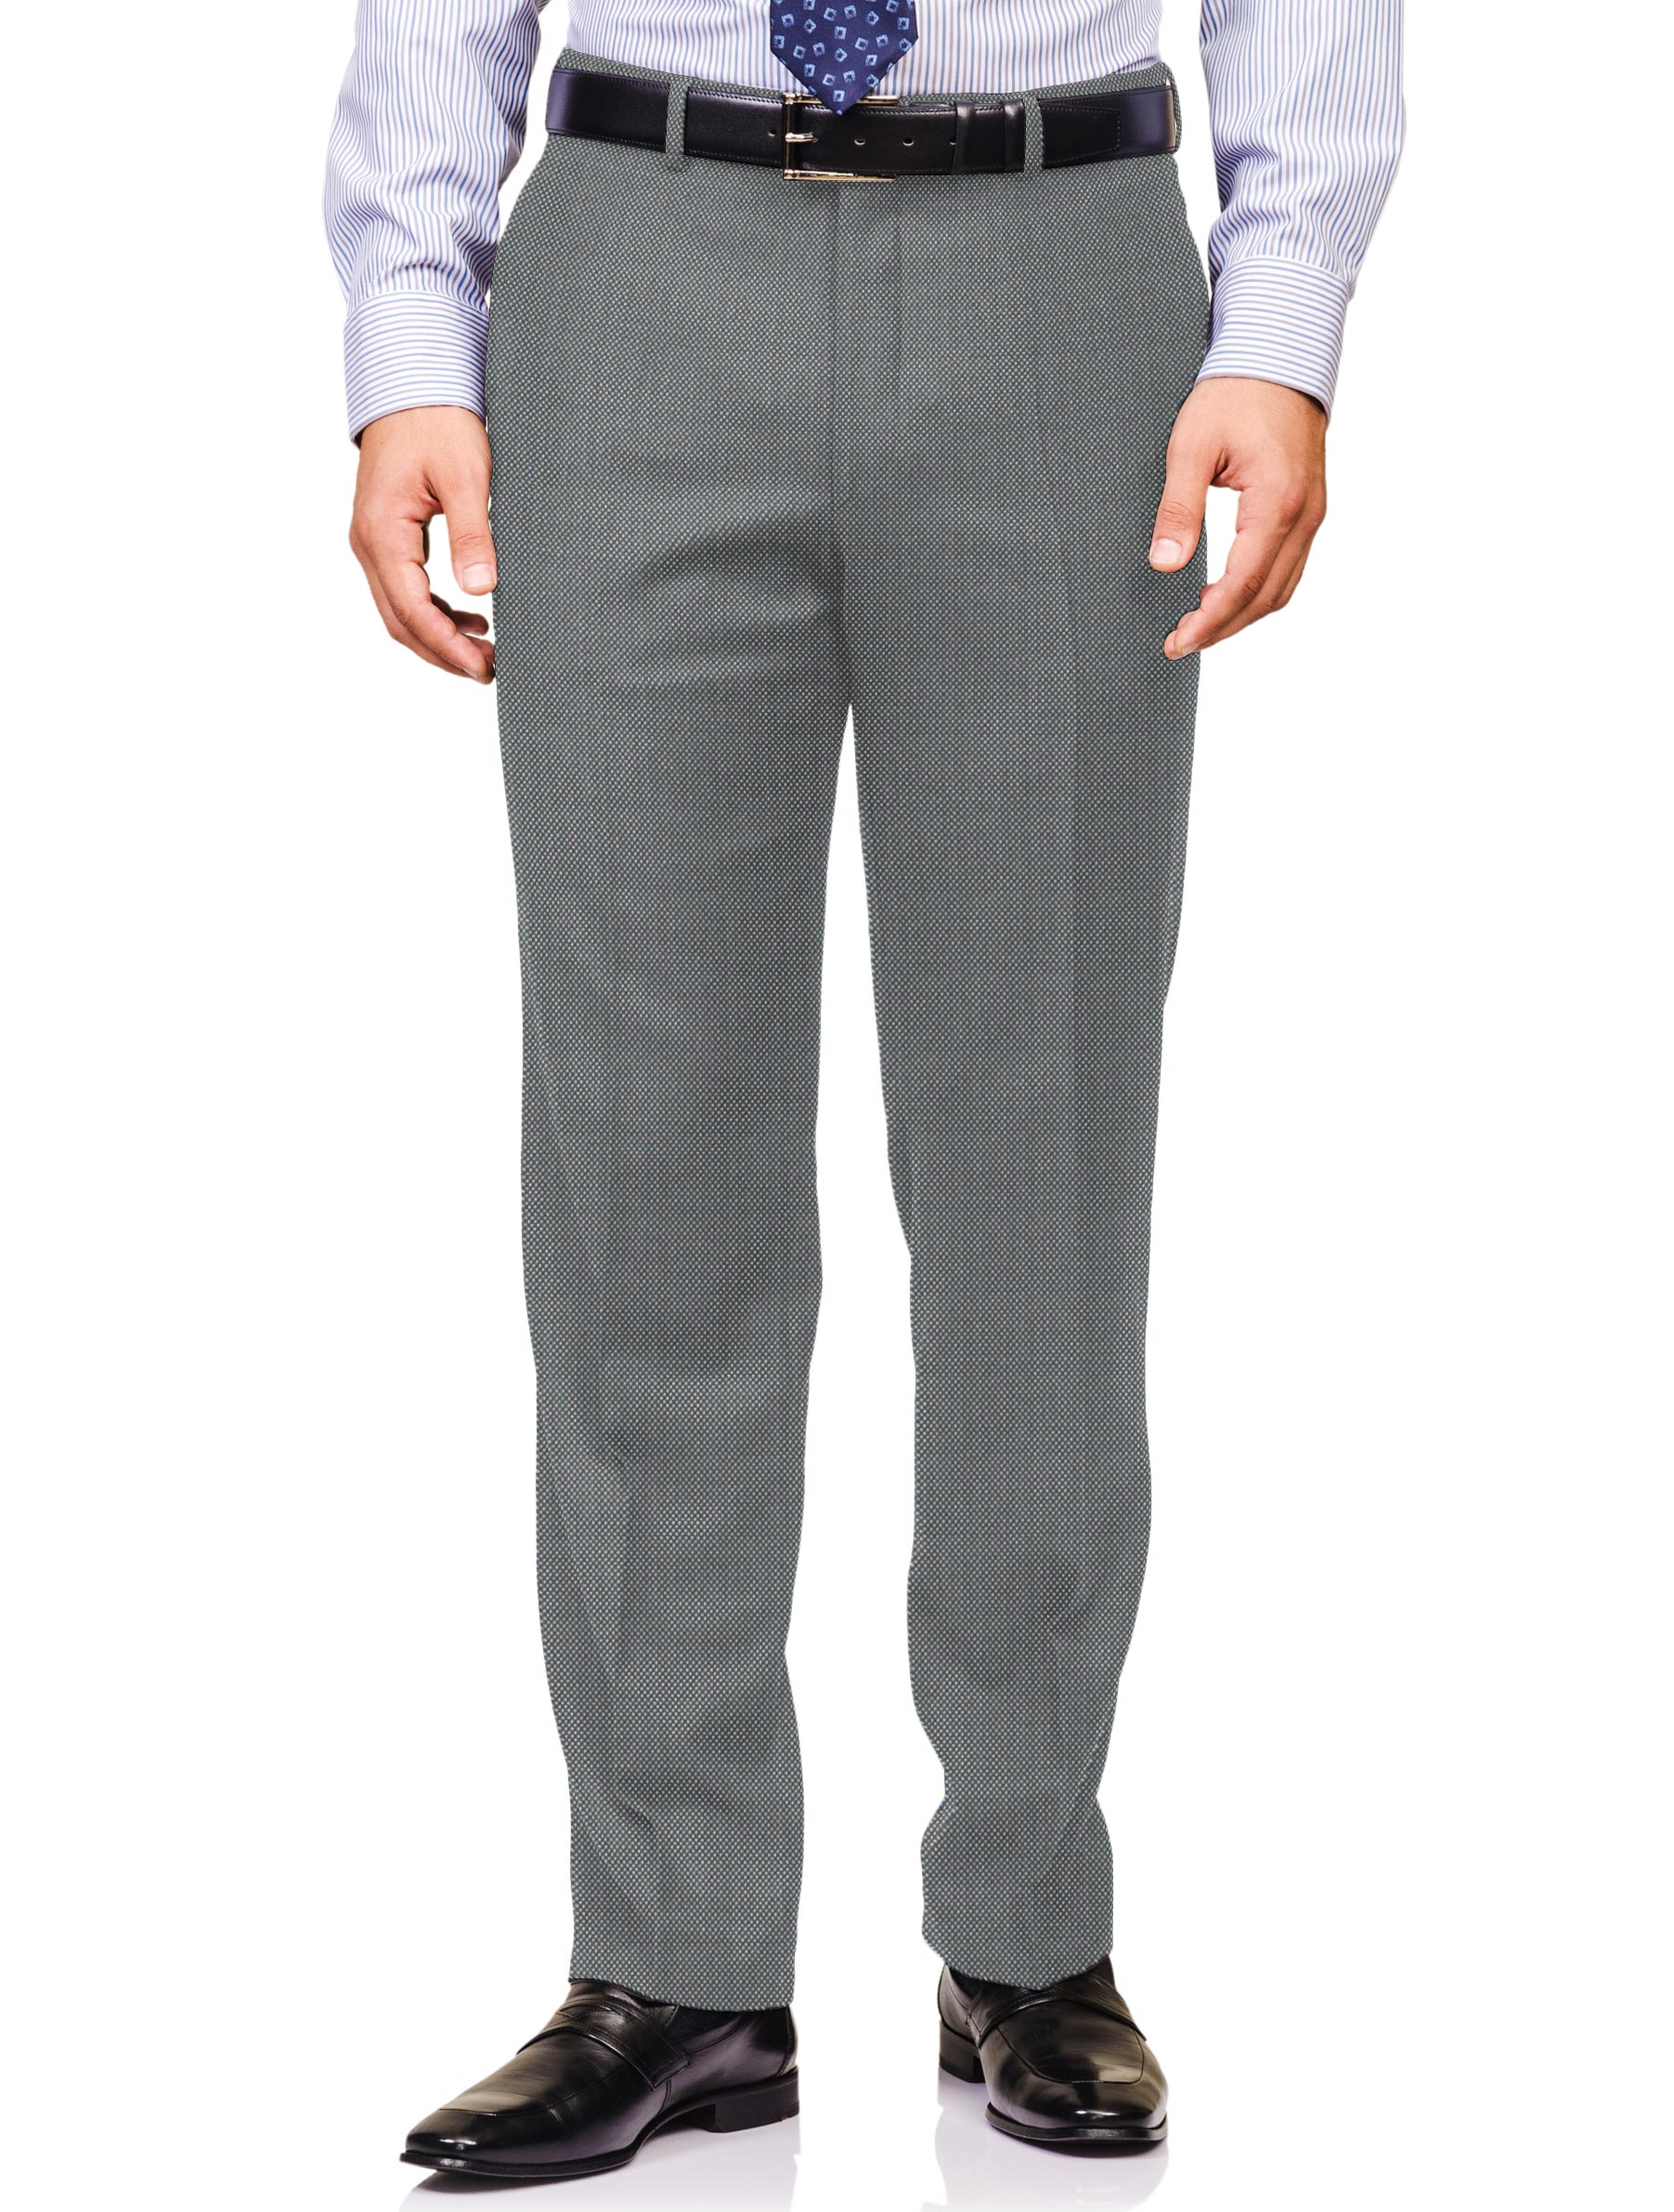 Buy MANCREW Checkered Stretchable Formal Pants for Men - Self-Design,  Wrinkle Free, Regular fit Luxury Formal Trousers for Men - Light Grey, 36  at Amazon.in